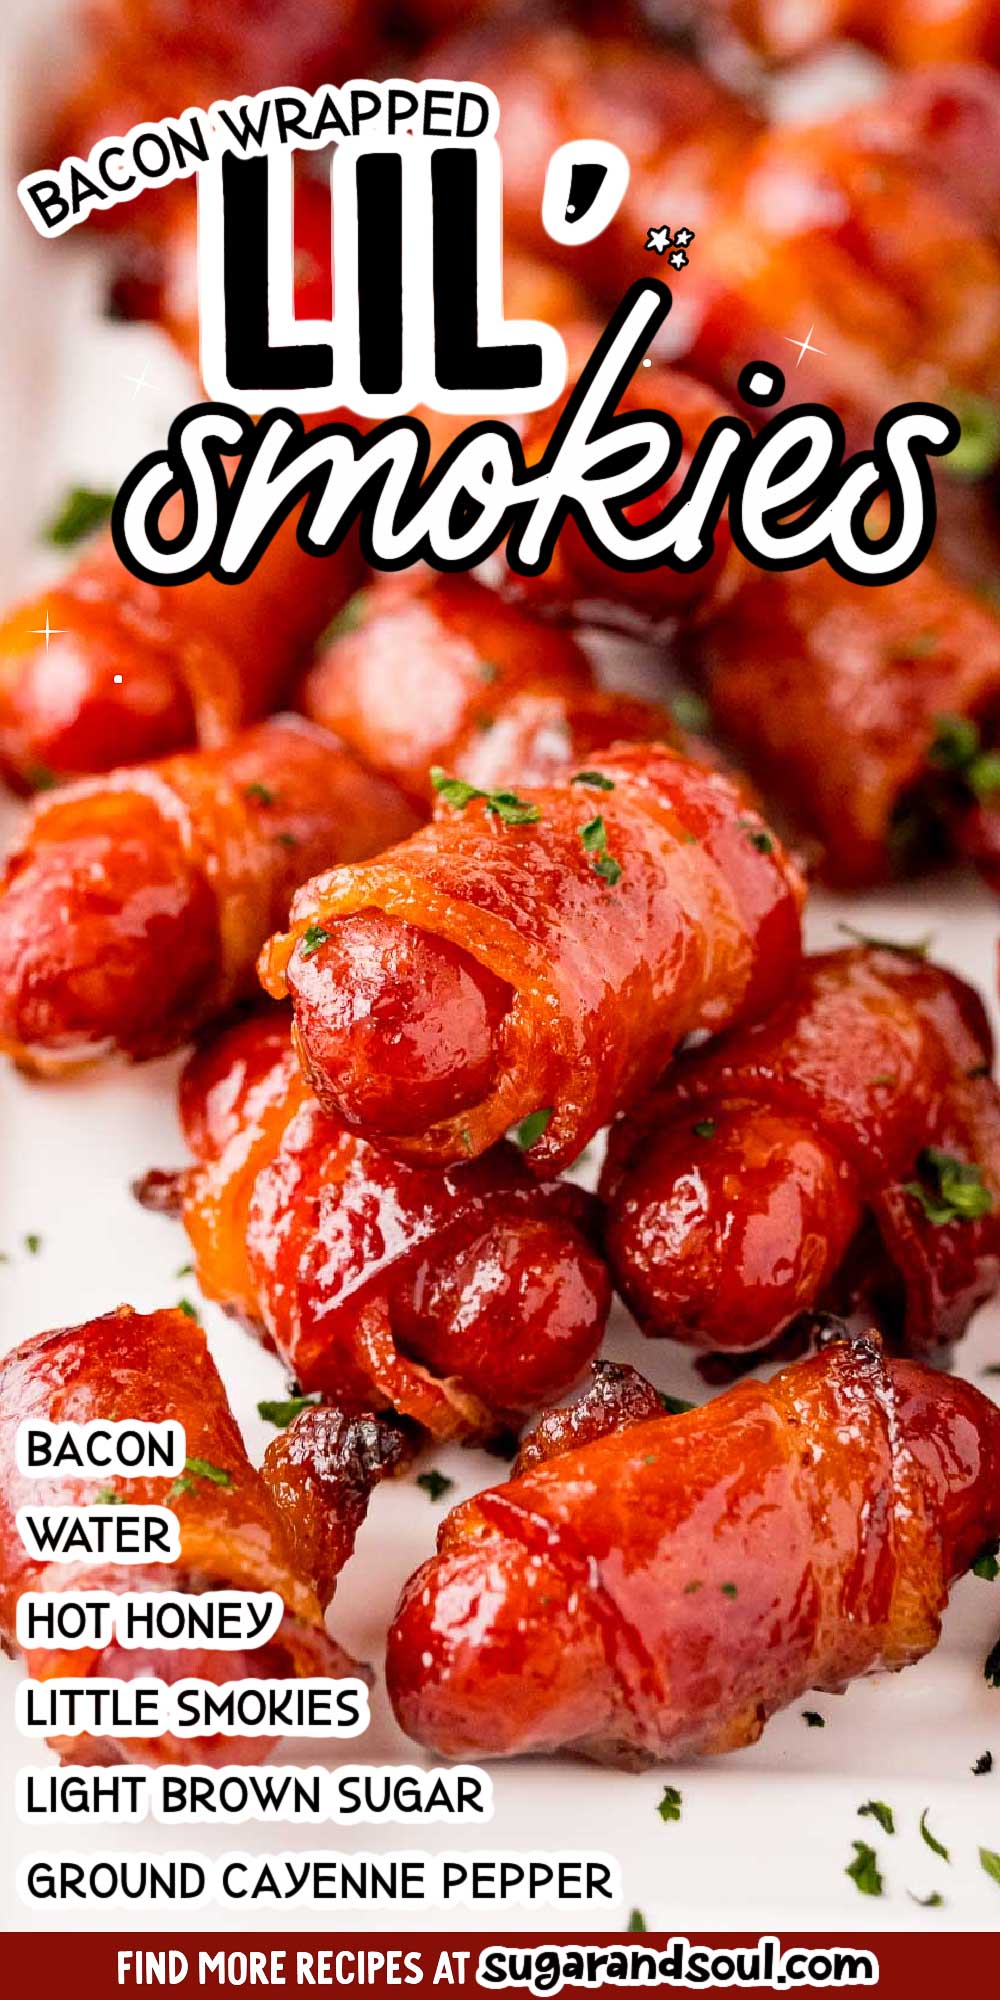 These Bacon Wrapped Smokies are the perfect game day appetizer made with just 4 ingredients! Lil smokies are wrapped in a slice of bacon and brushed with a hot honey and brown sugar glaze that will surely satisfy your guests! via @sugarandsoulco